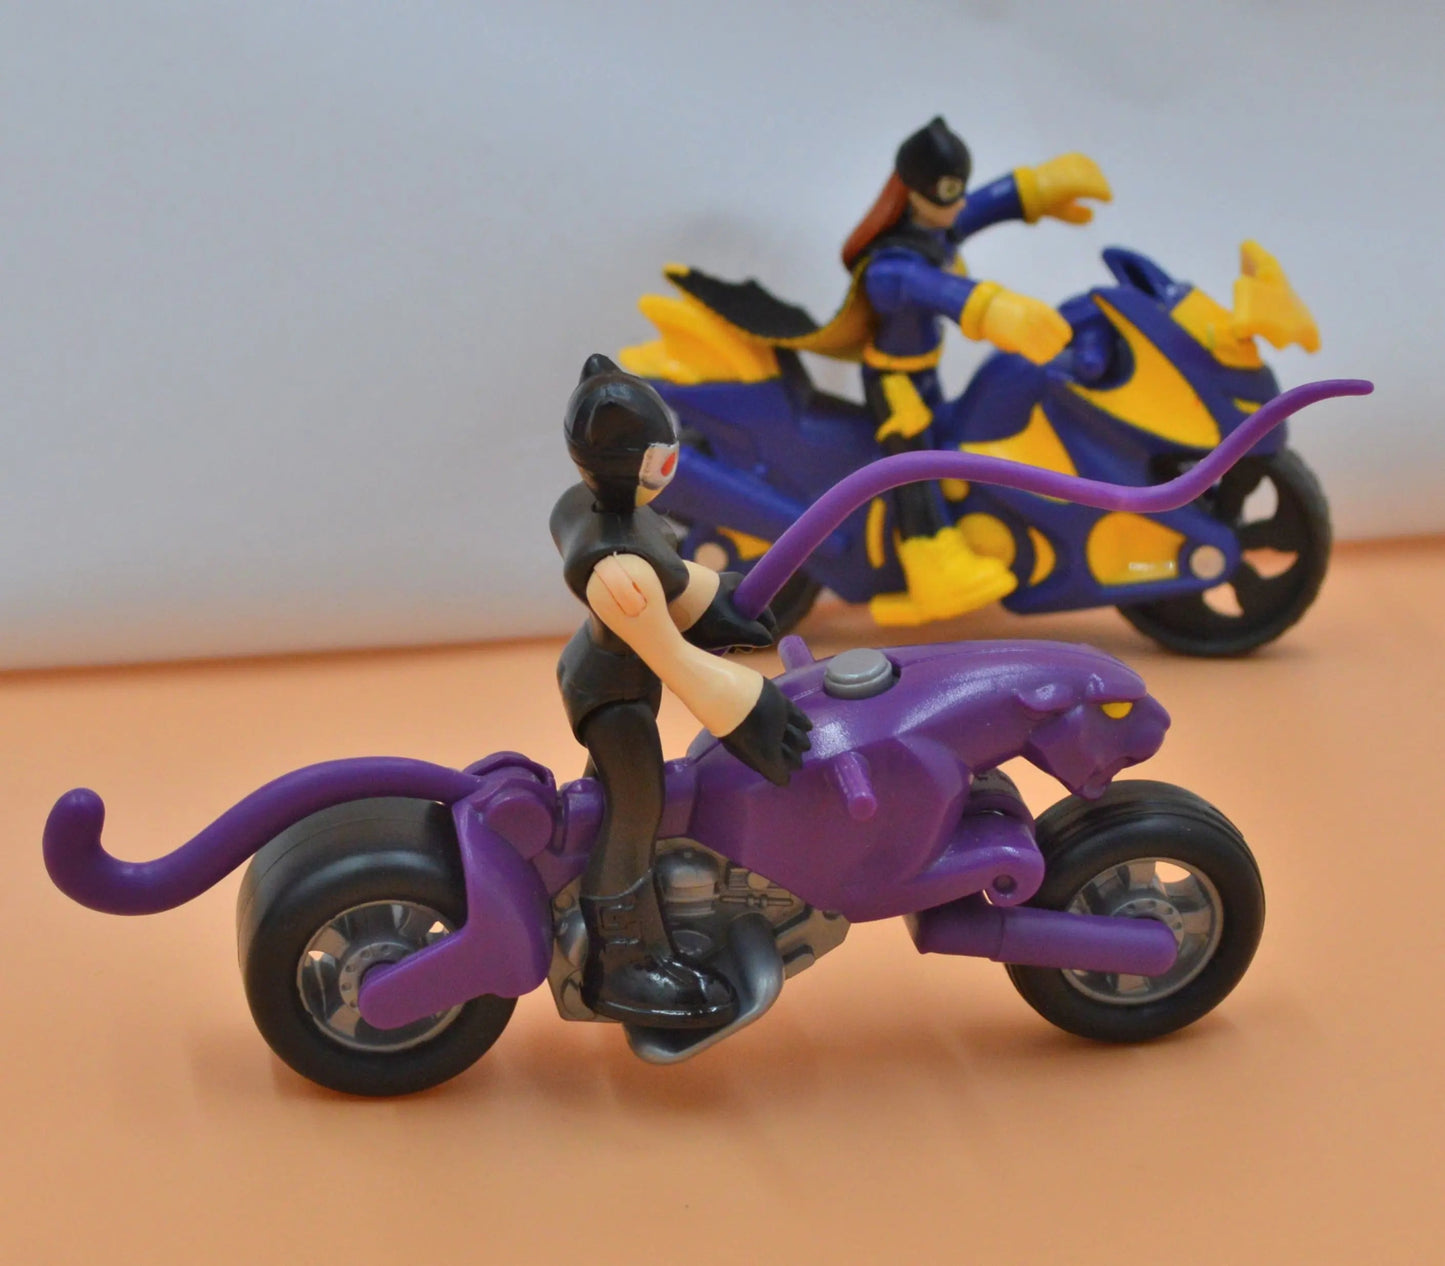 IMAGINEXT BATGIRL AND CATWOMAN ACTION FIGURES AND MOTORCYCLES - TMD167207